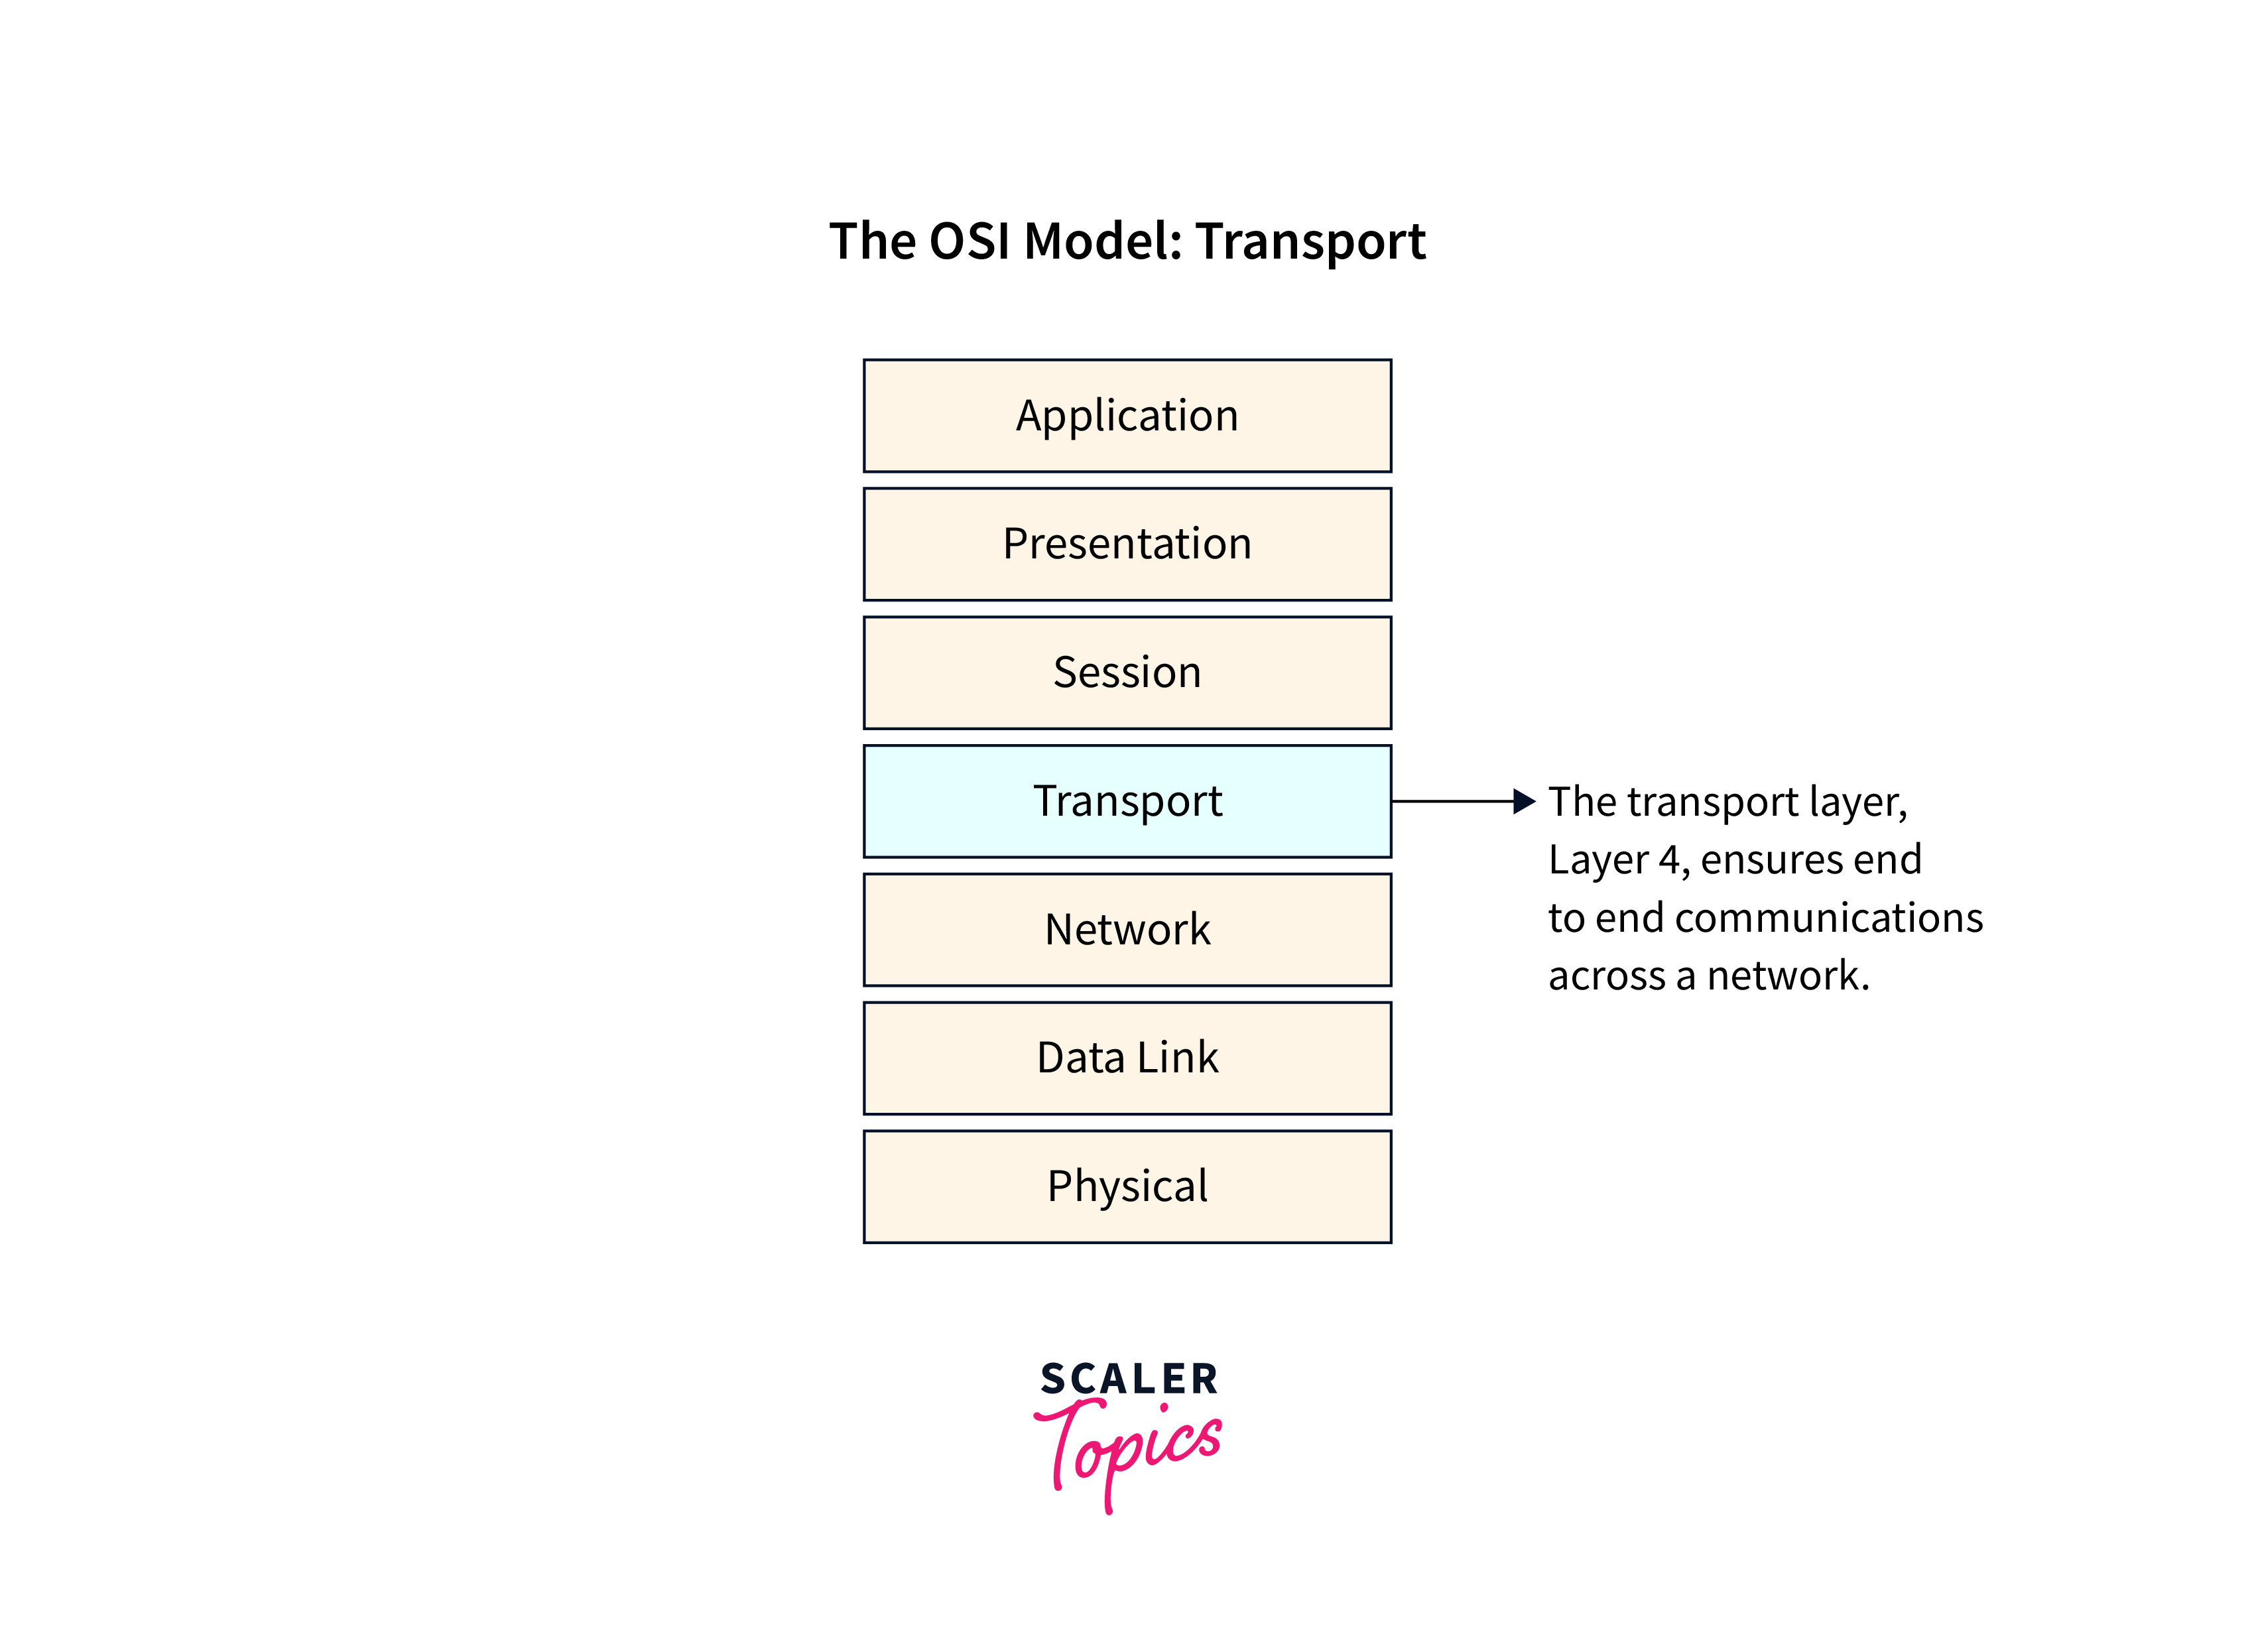 What is the transport layer